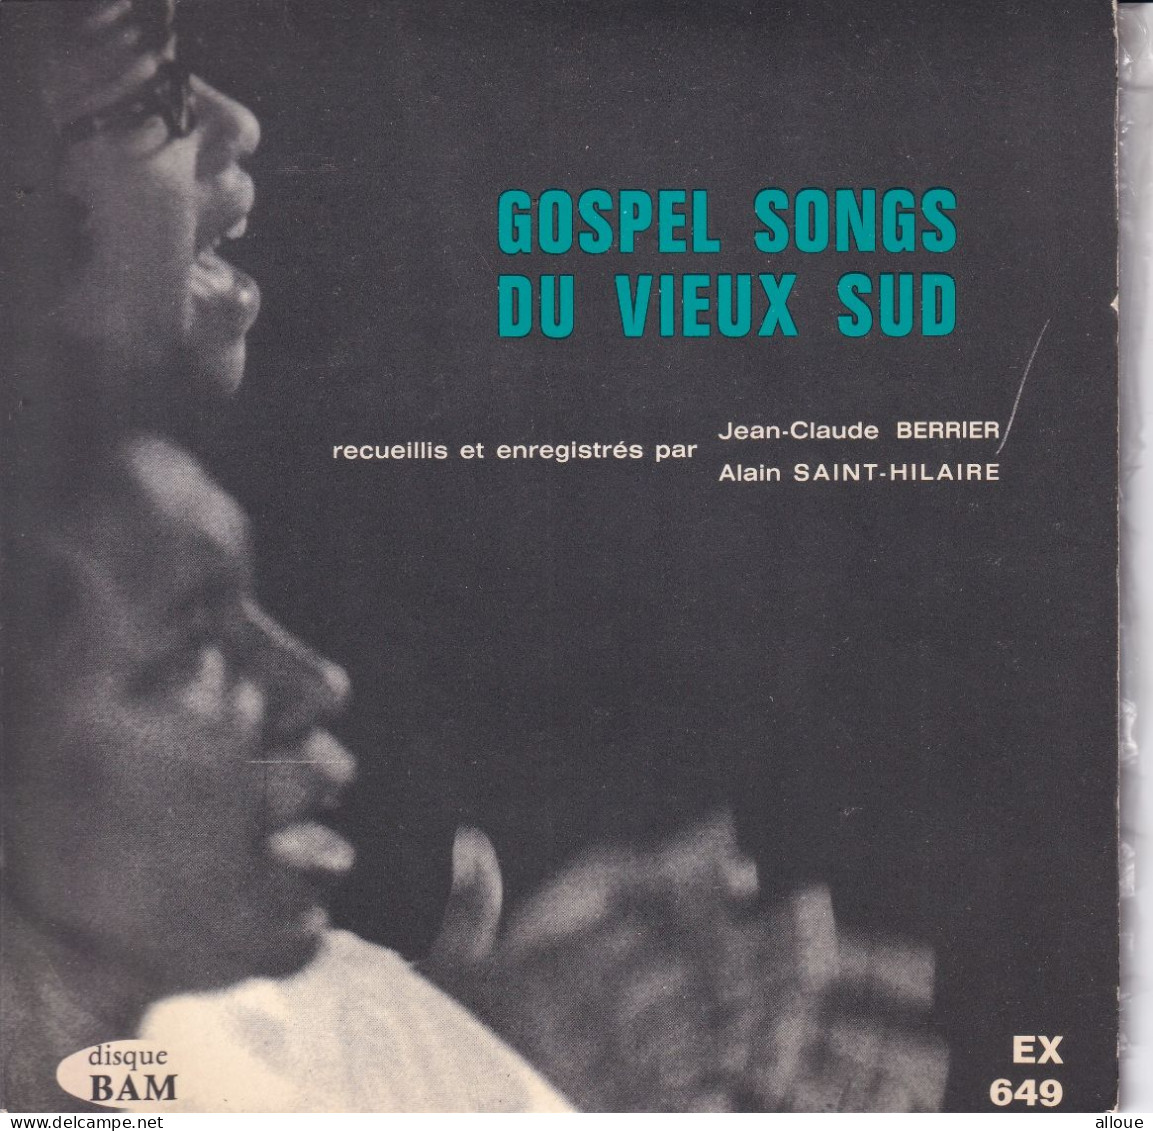 GOSPEL SONGS DU VIEUX SUD - FR EP - PREACHER, BROTHERS AND SISTERS OF THE CONGREGATION SINGING GOSPEL SONGS - Gospel & Religiöser Gesang